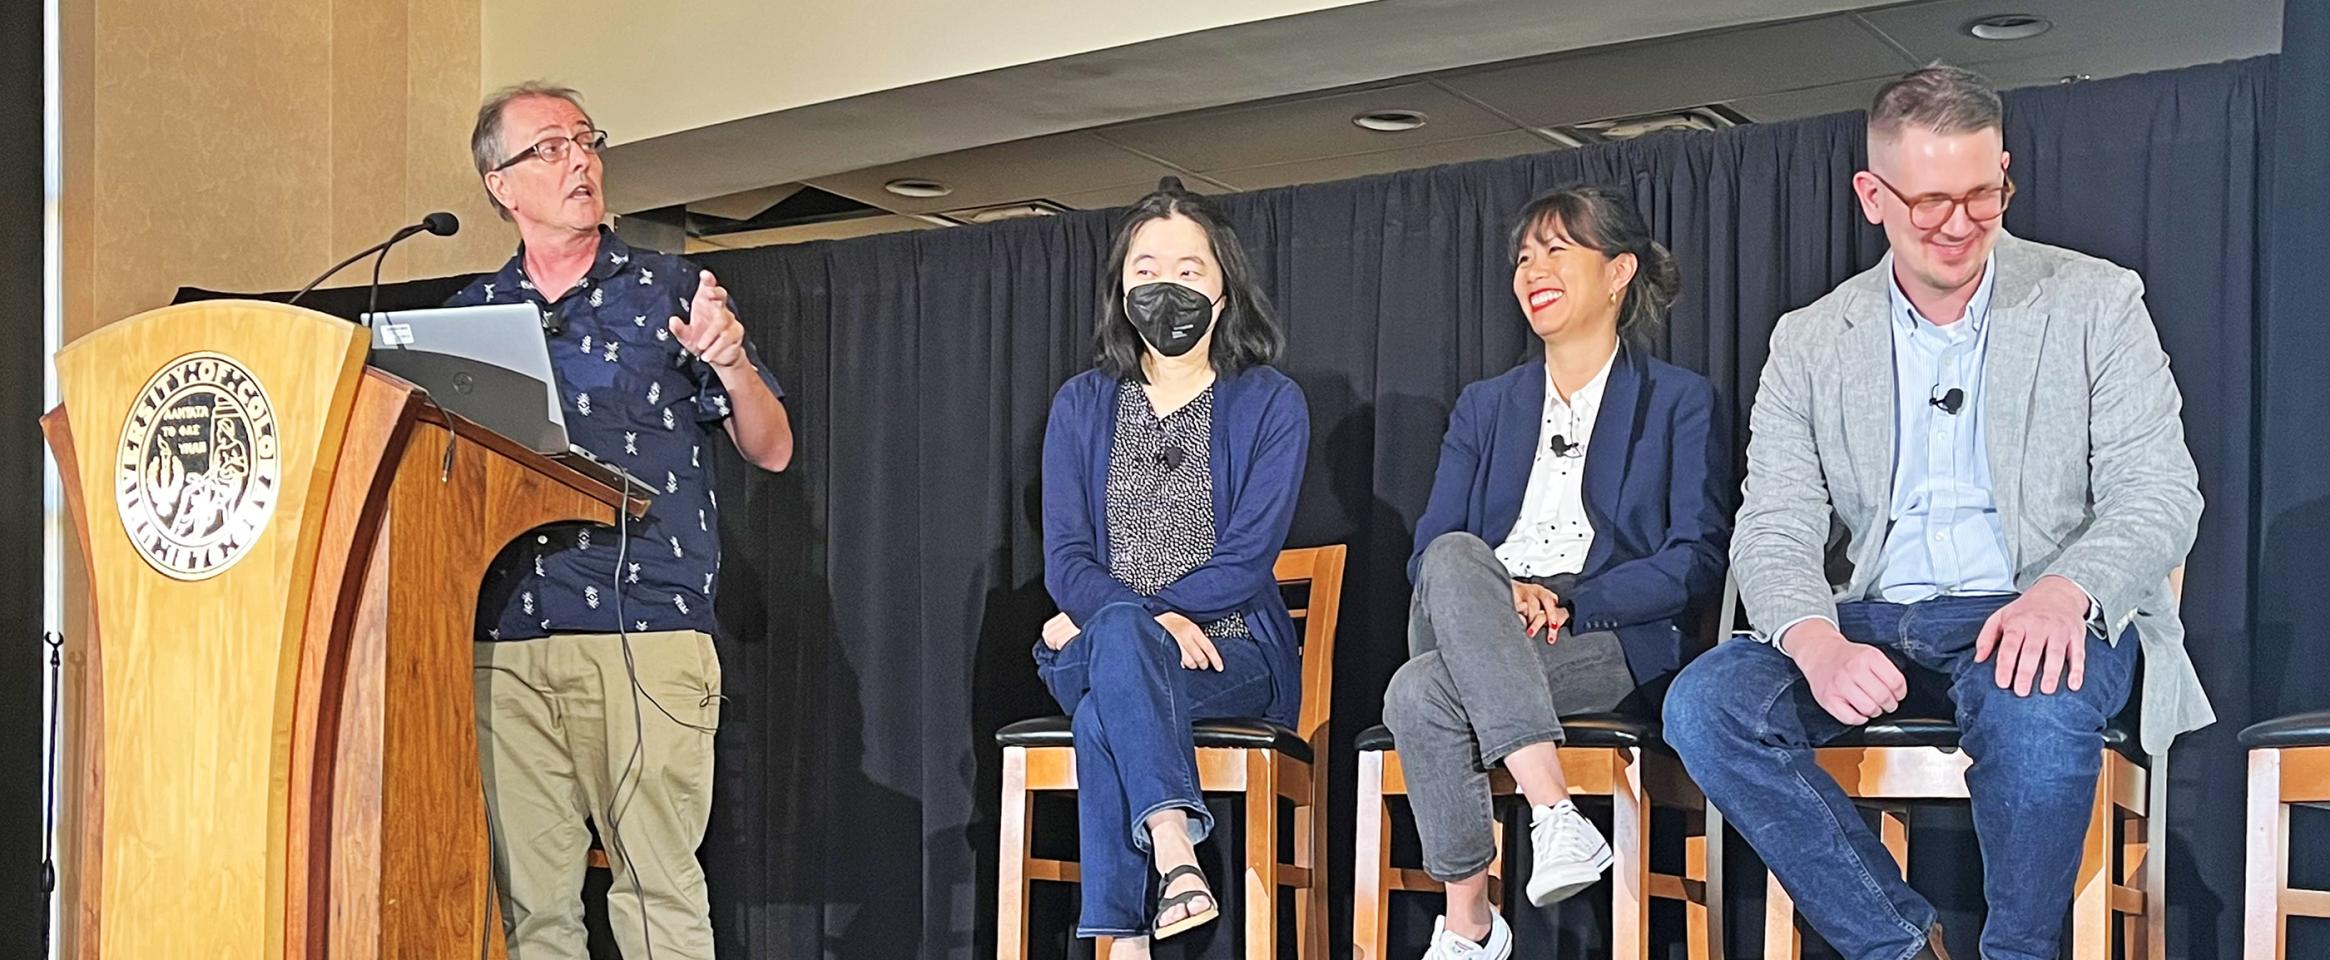 Horizontal photo of Peter Aldhous speaking at the podium next to seated panelists Lisa Song, who is masked, Stephanie Lee, and Nicholas Florko. Photo by Gabriella Lewis.